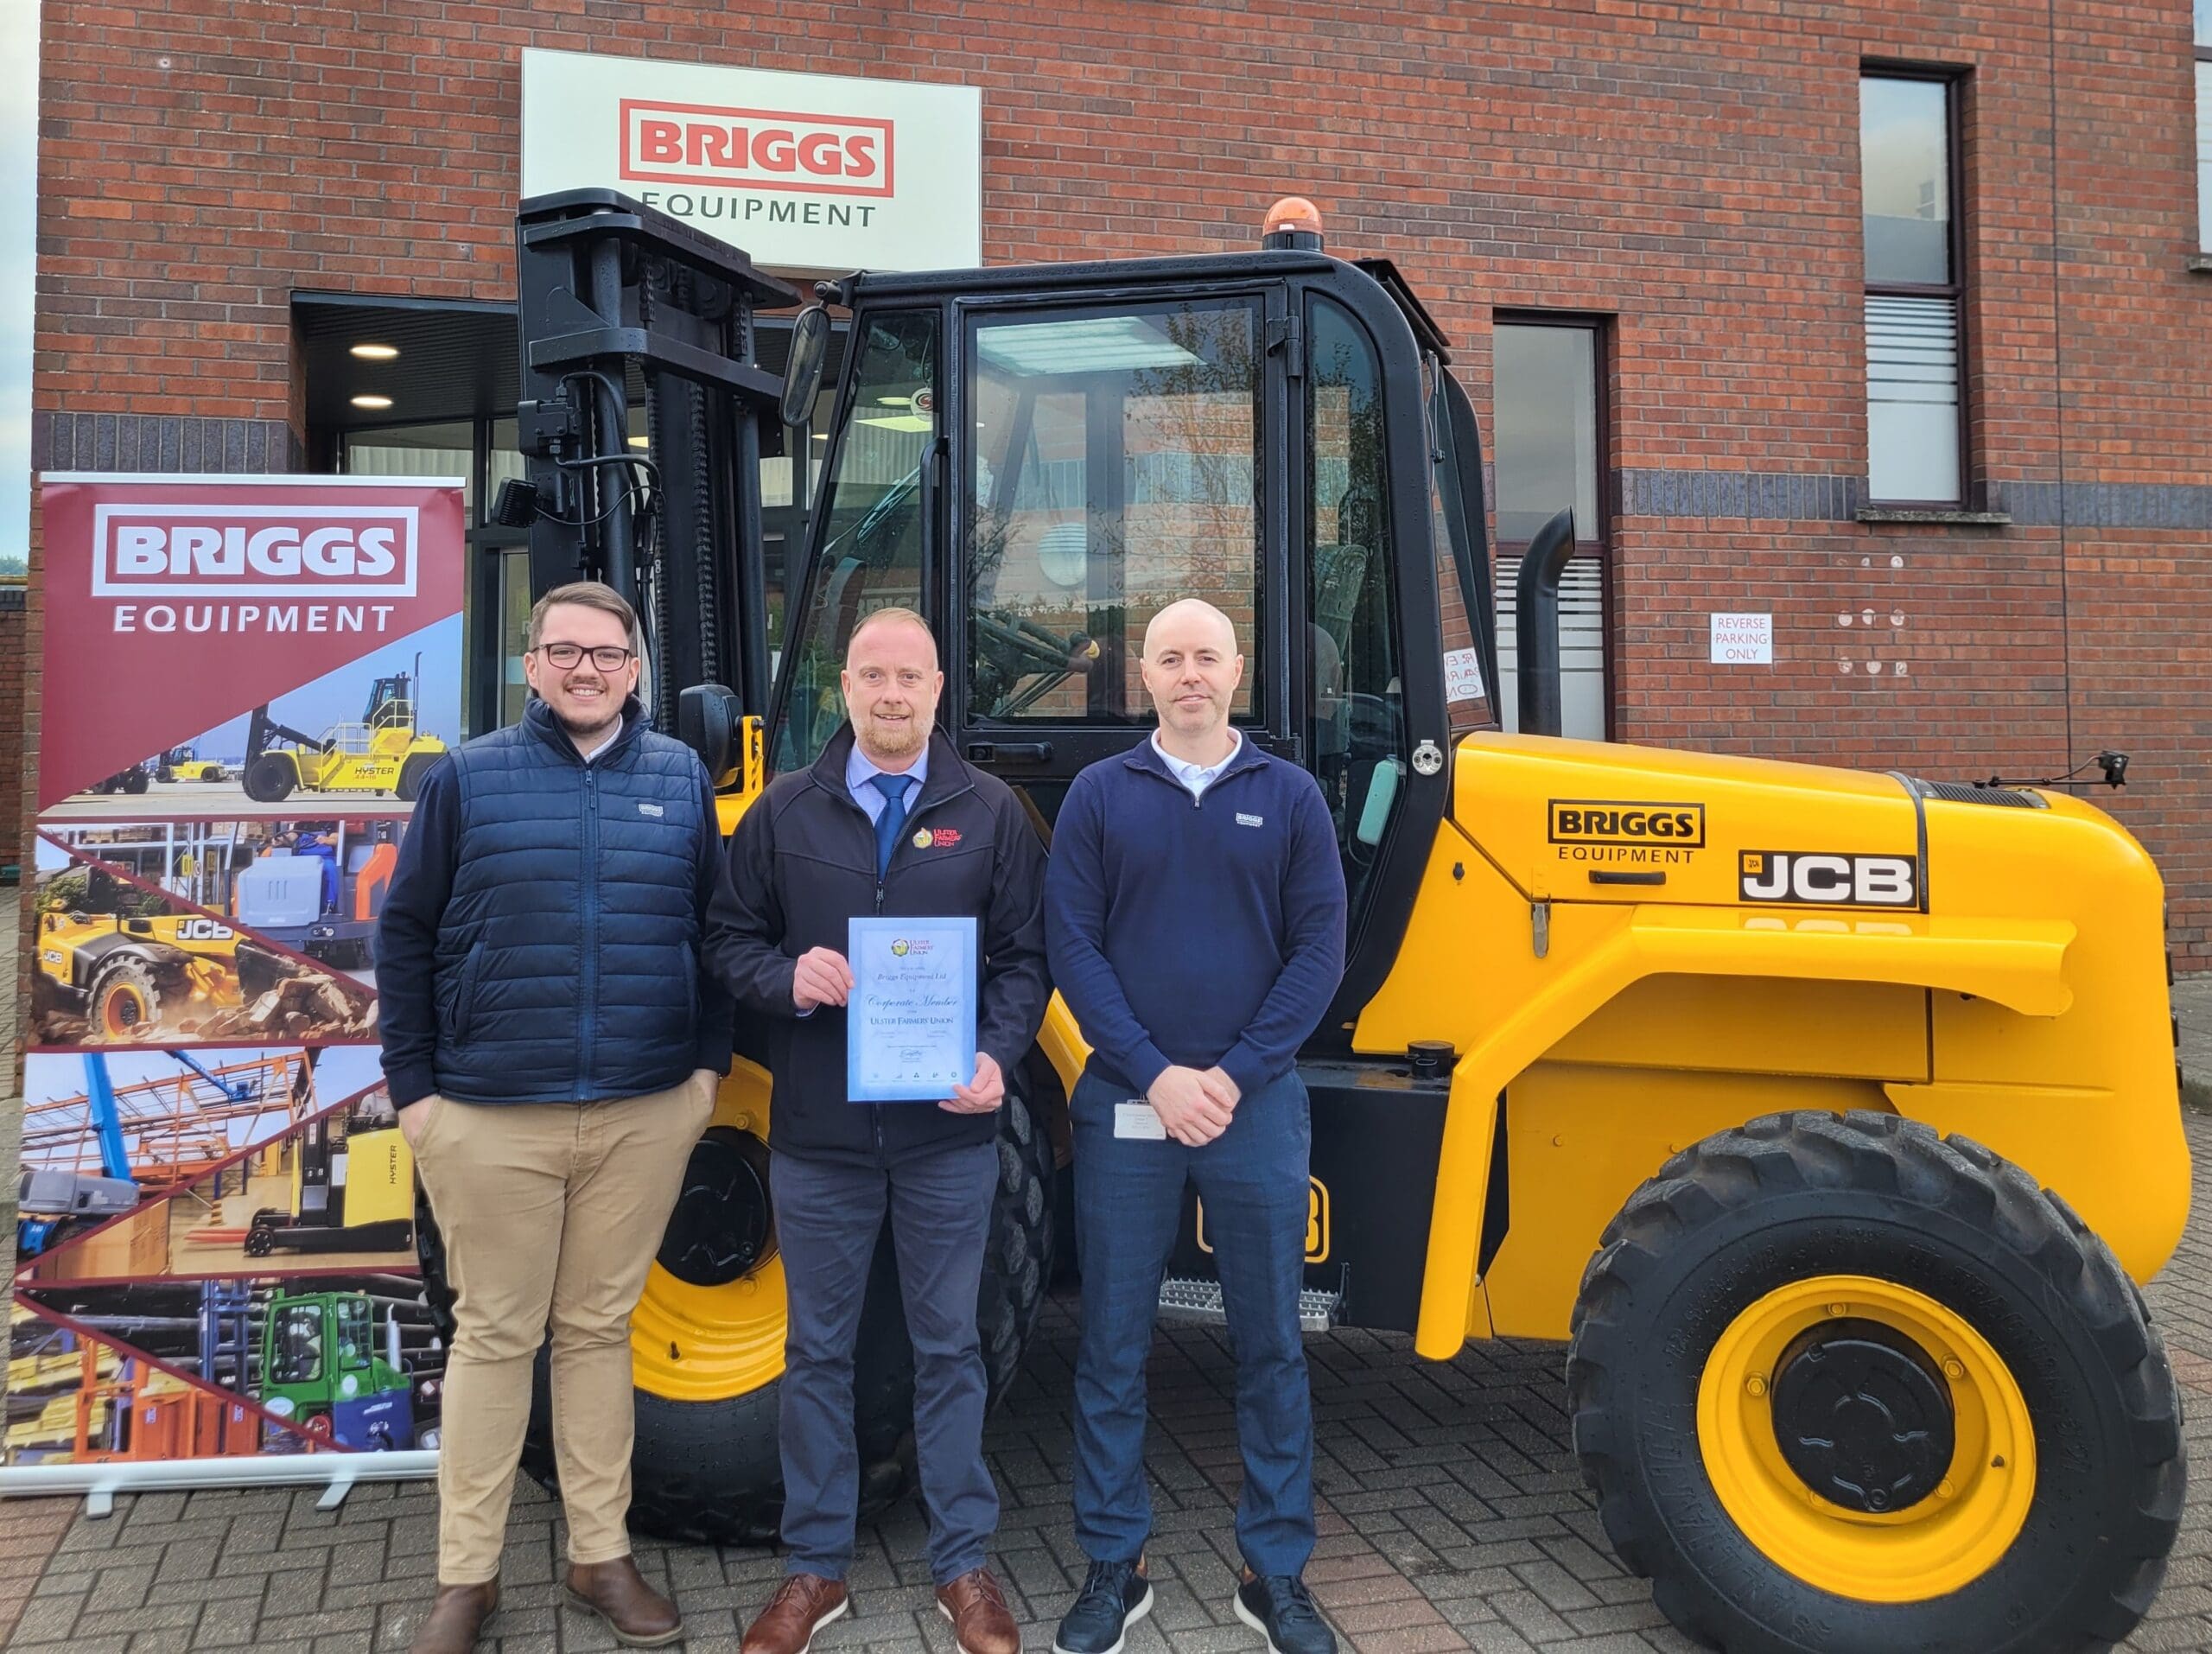 Stephen Mckenna Briggs marketing manager, Aodhan Smith used machinery manager and Craig Scott, UFU corporate sales executive.